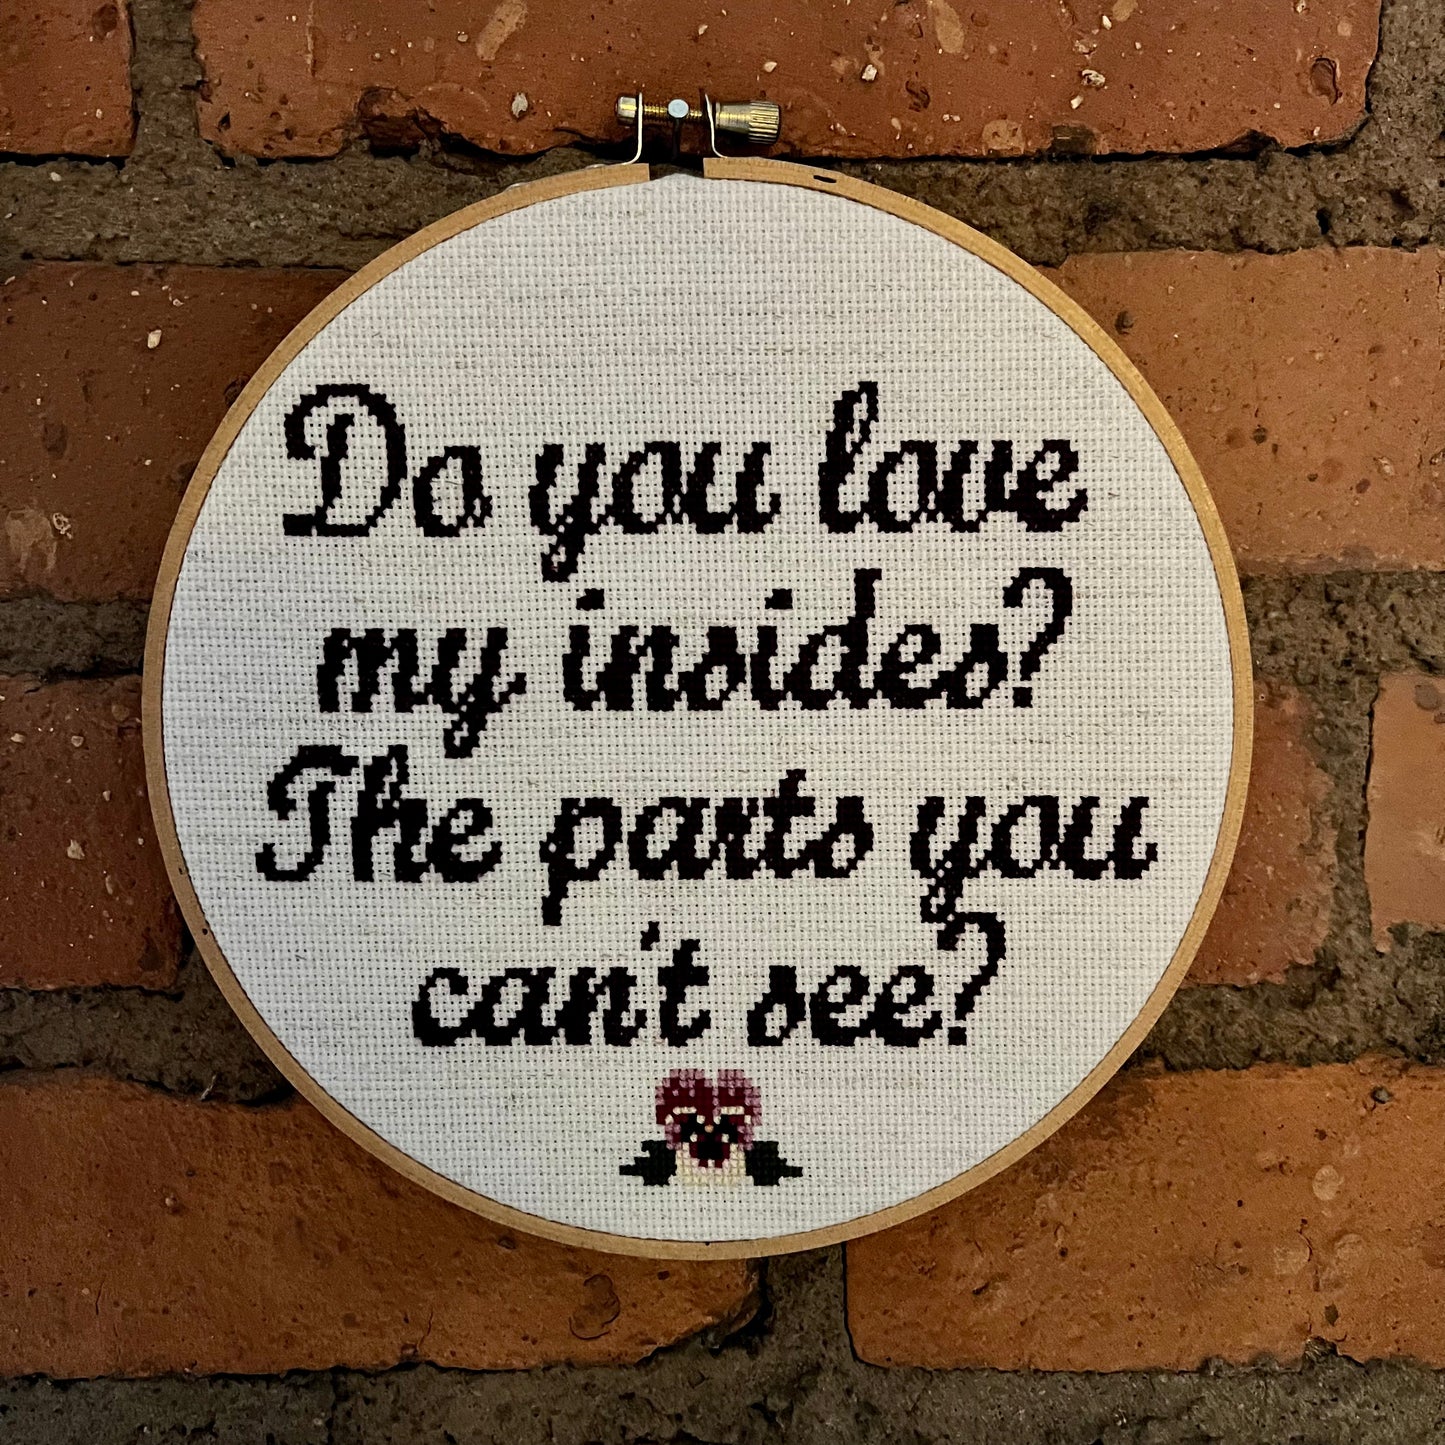 Do You Love My Insides? 7” Hand Stitched Cross Stitch Hoop